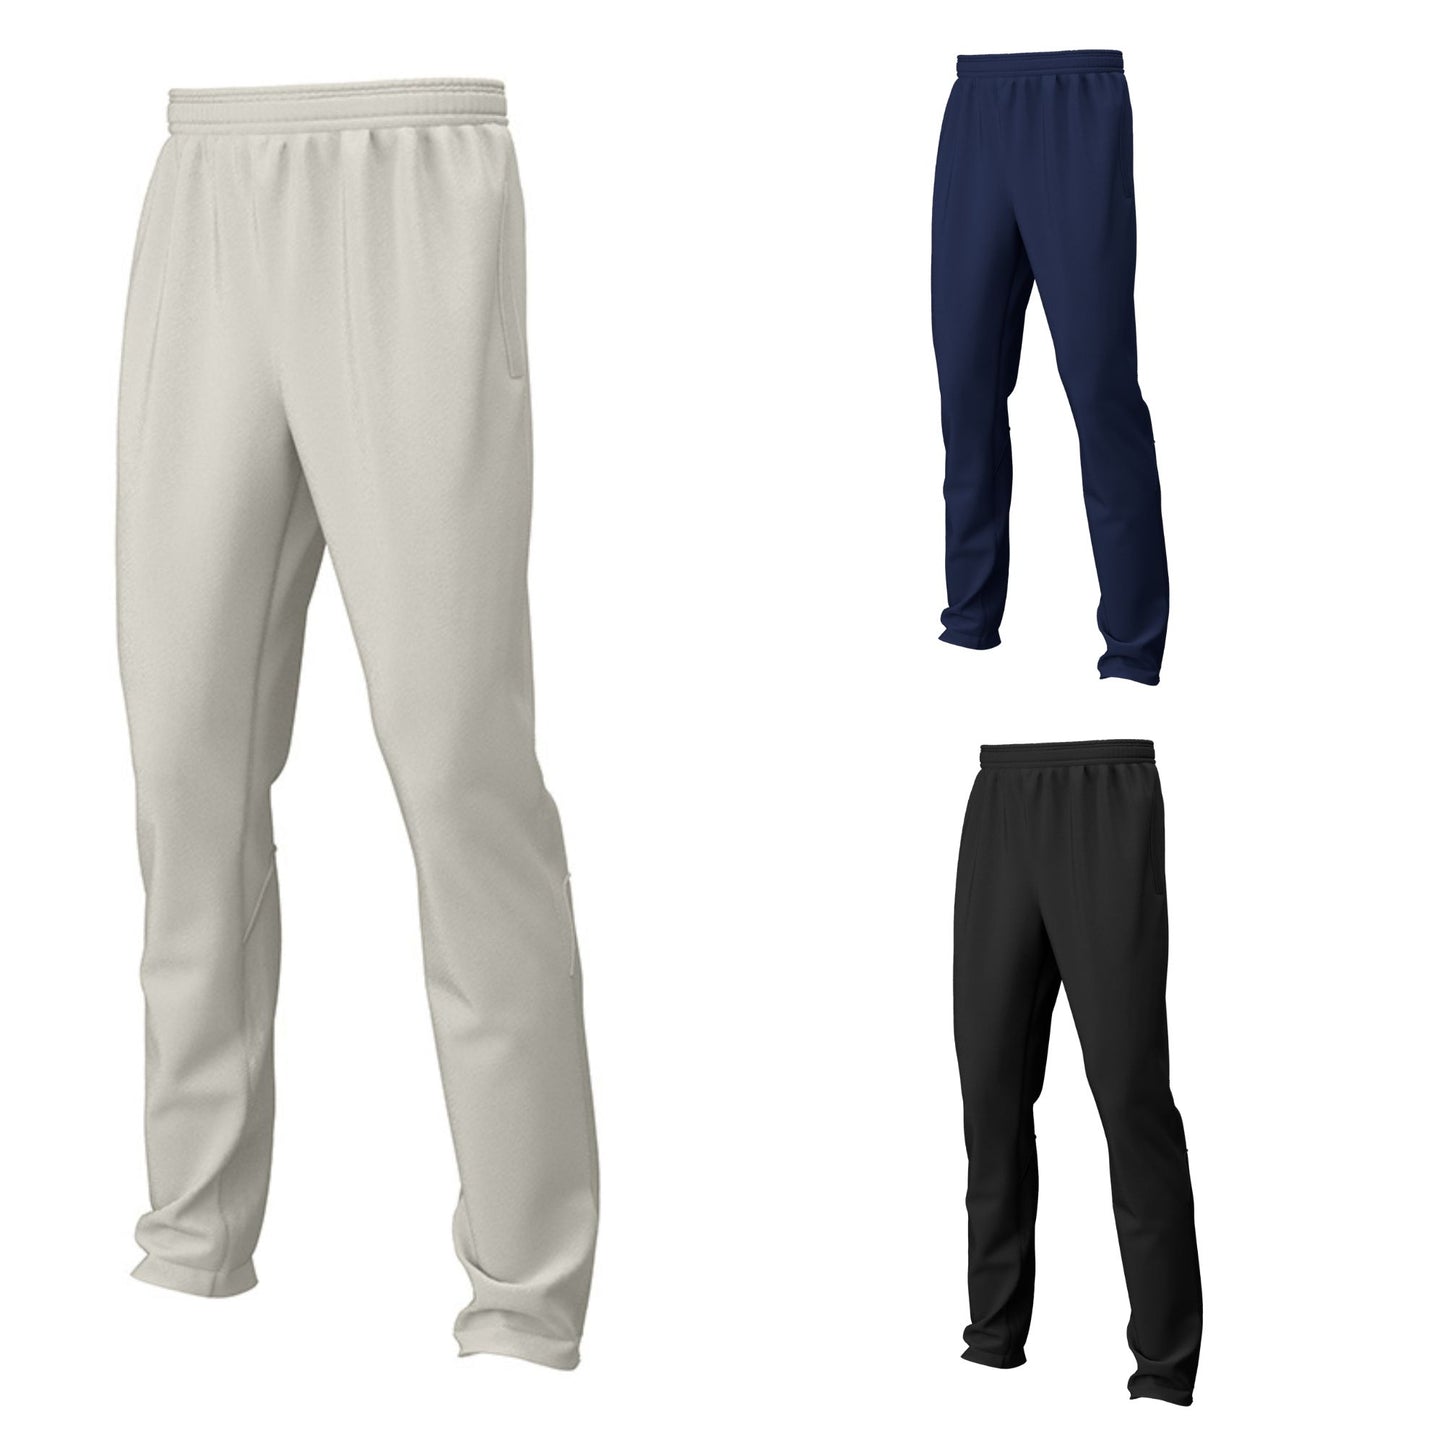 CHADWICK RADIAL CRICKET TROUSERS - YOUTH